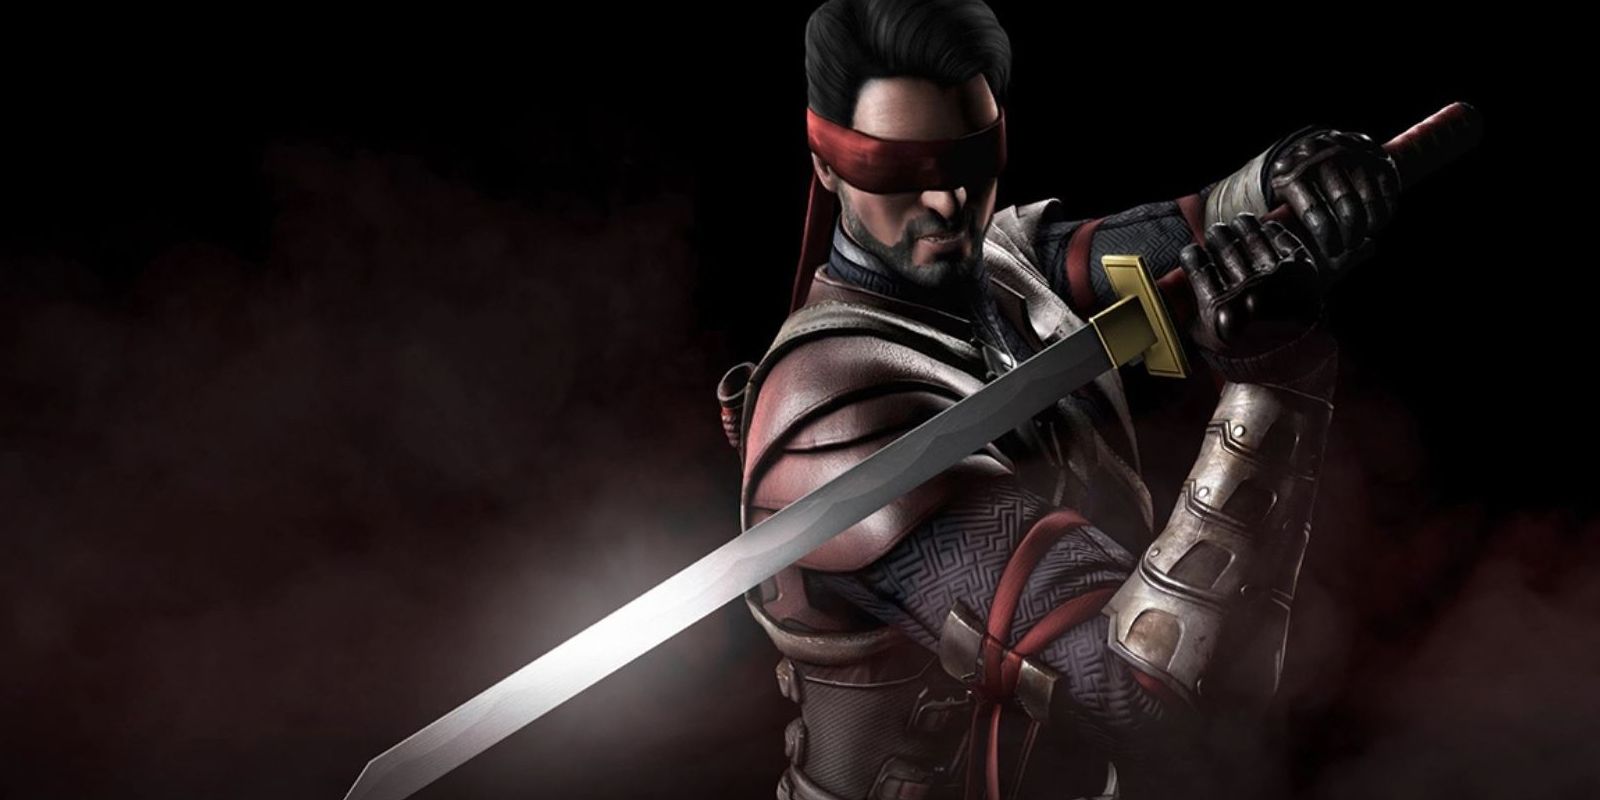 Mortal Kombat's Kenshi with a red bandana covering his eyes and holding a sword.